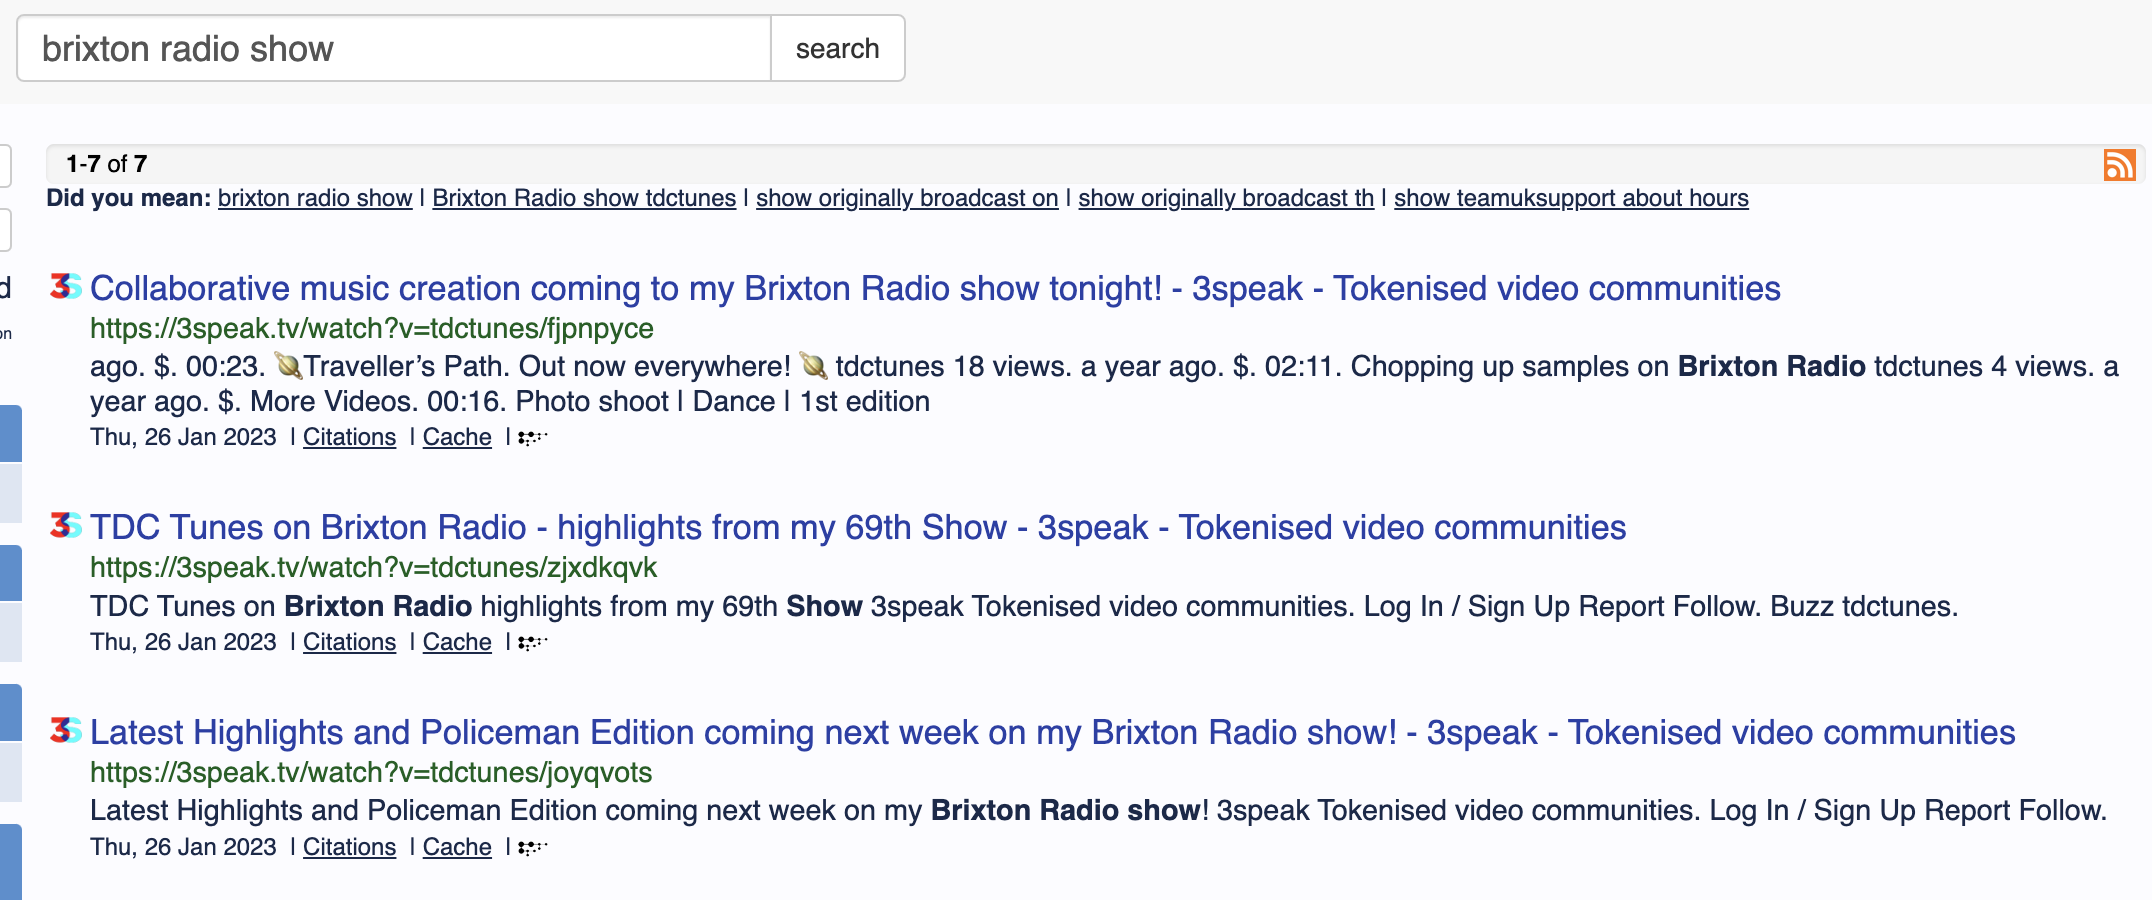 Brixton Radio Show search: Showing TDC Tunes and 3Speak as results!